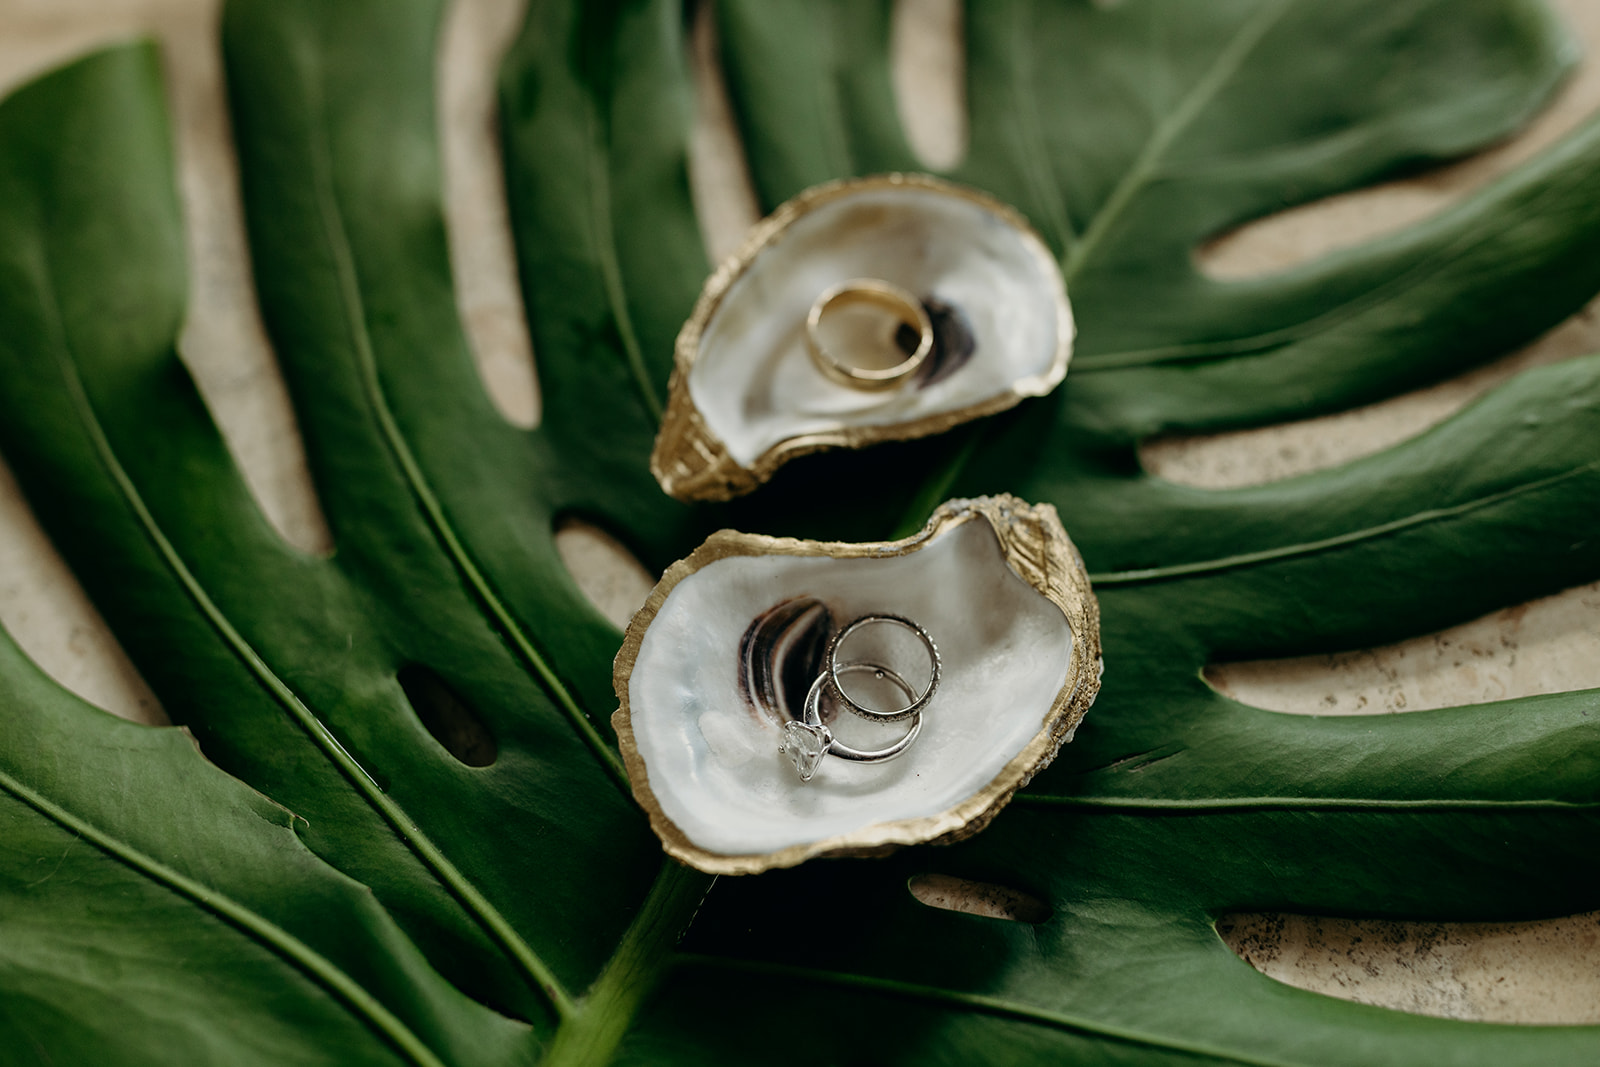 Gold rimmed oyster shells and wedding rings 